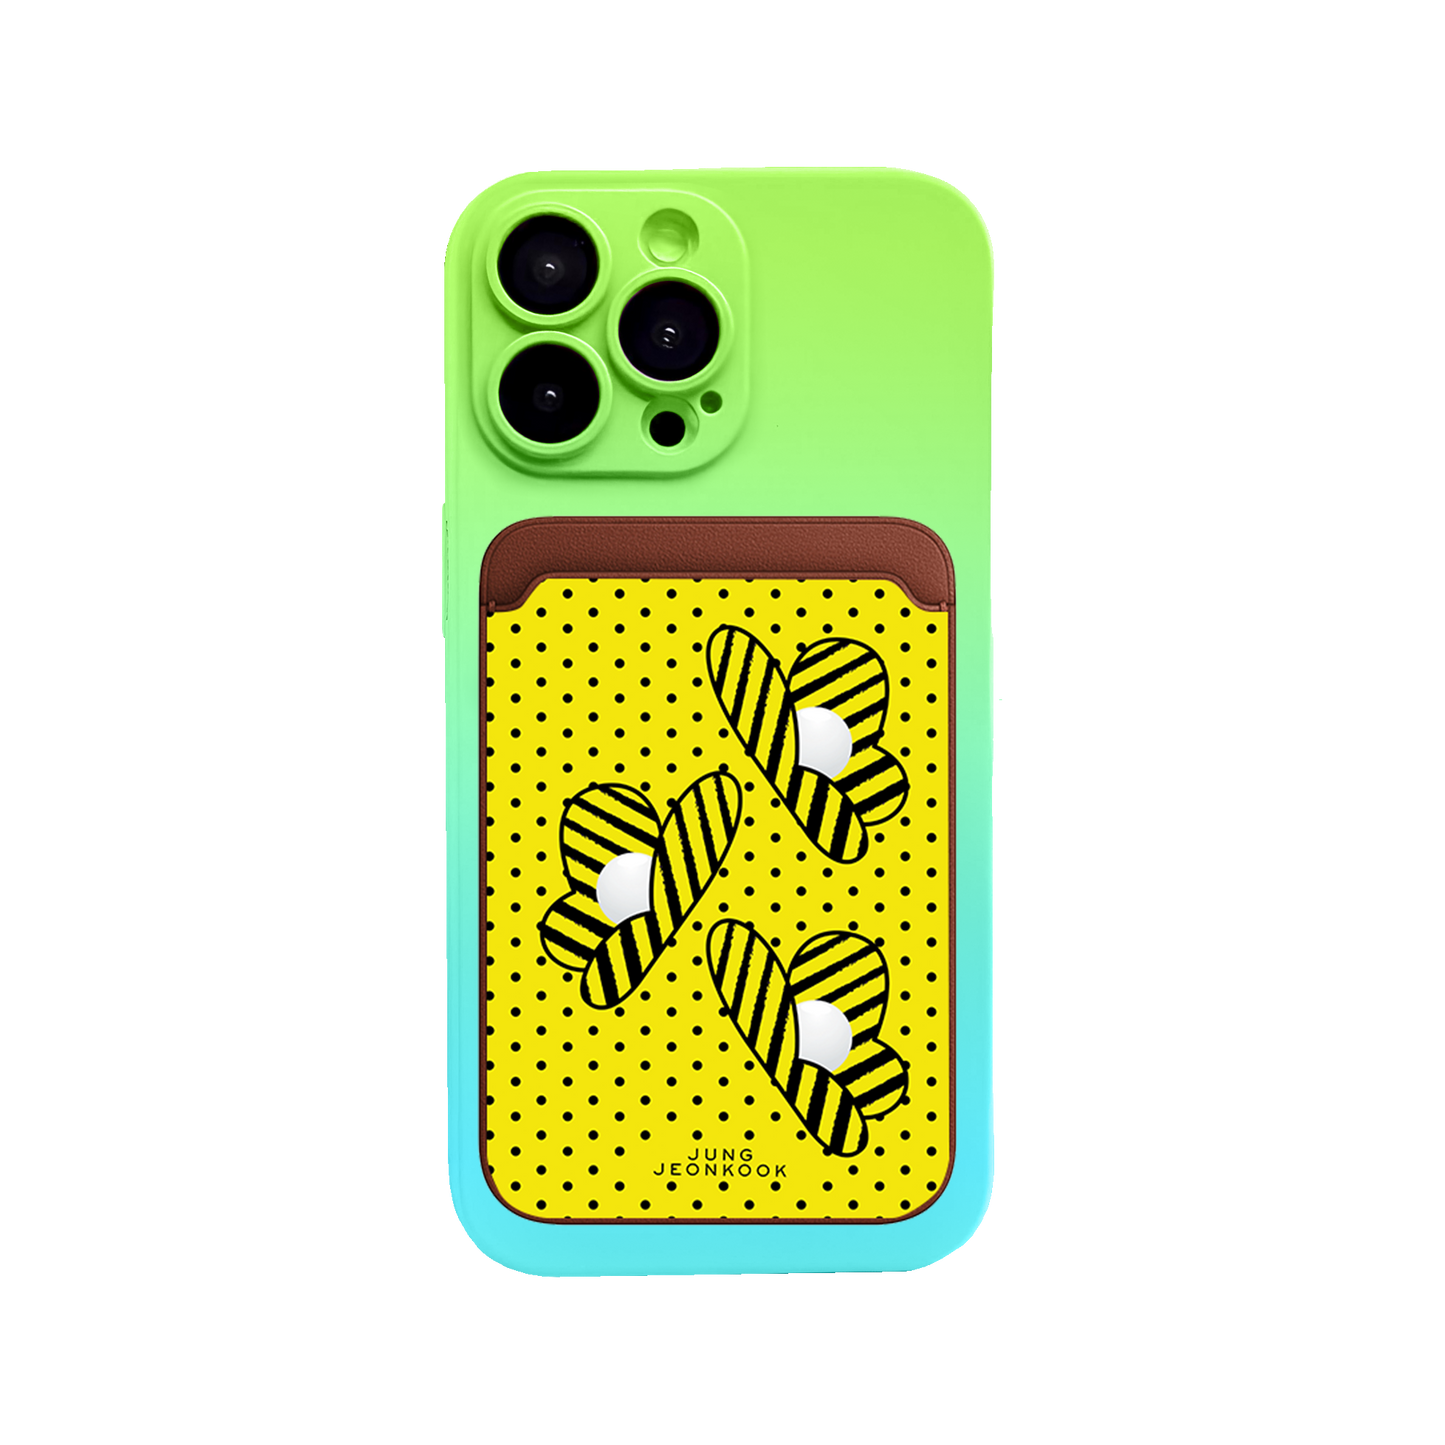 iPhone Magnetic Wallet Silicone Case - Honey